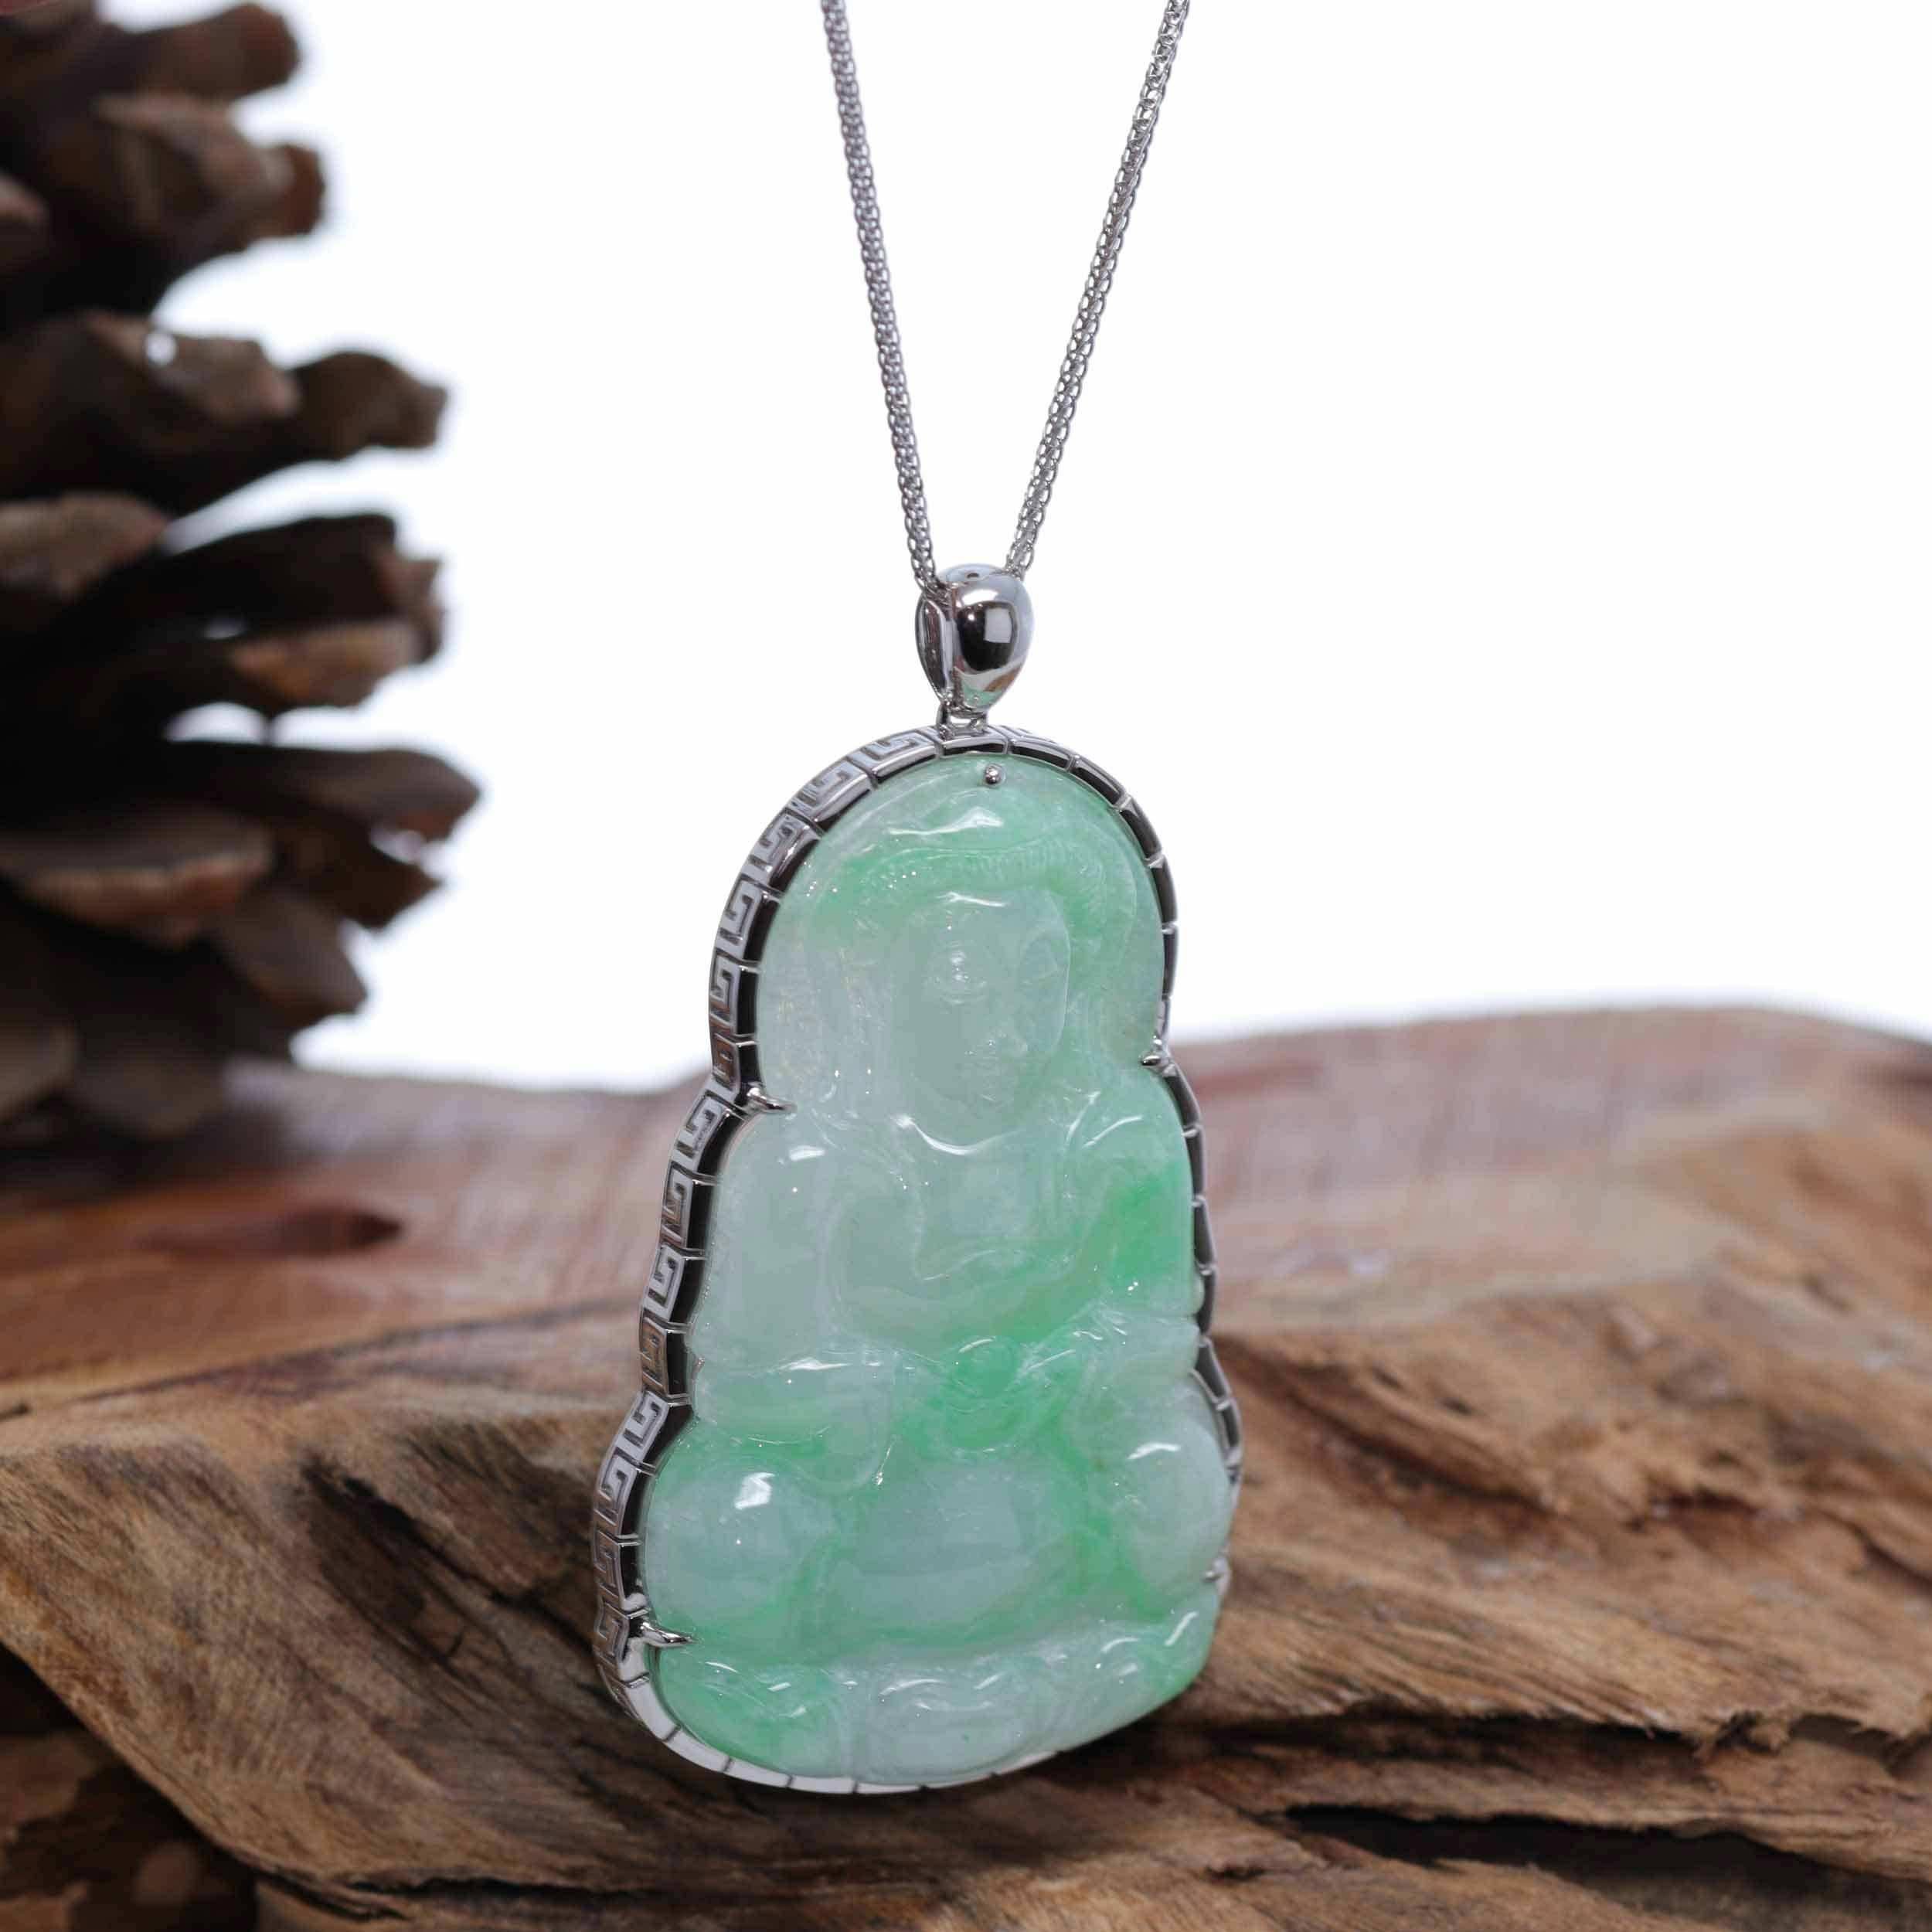 jade guanyin pendant meaning